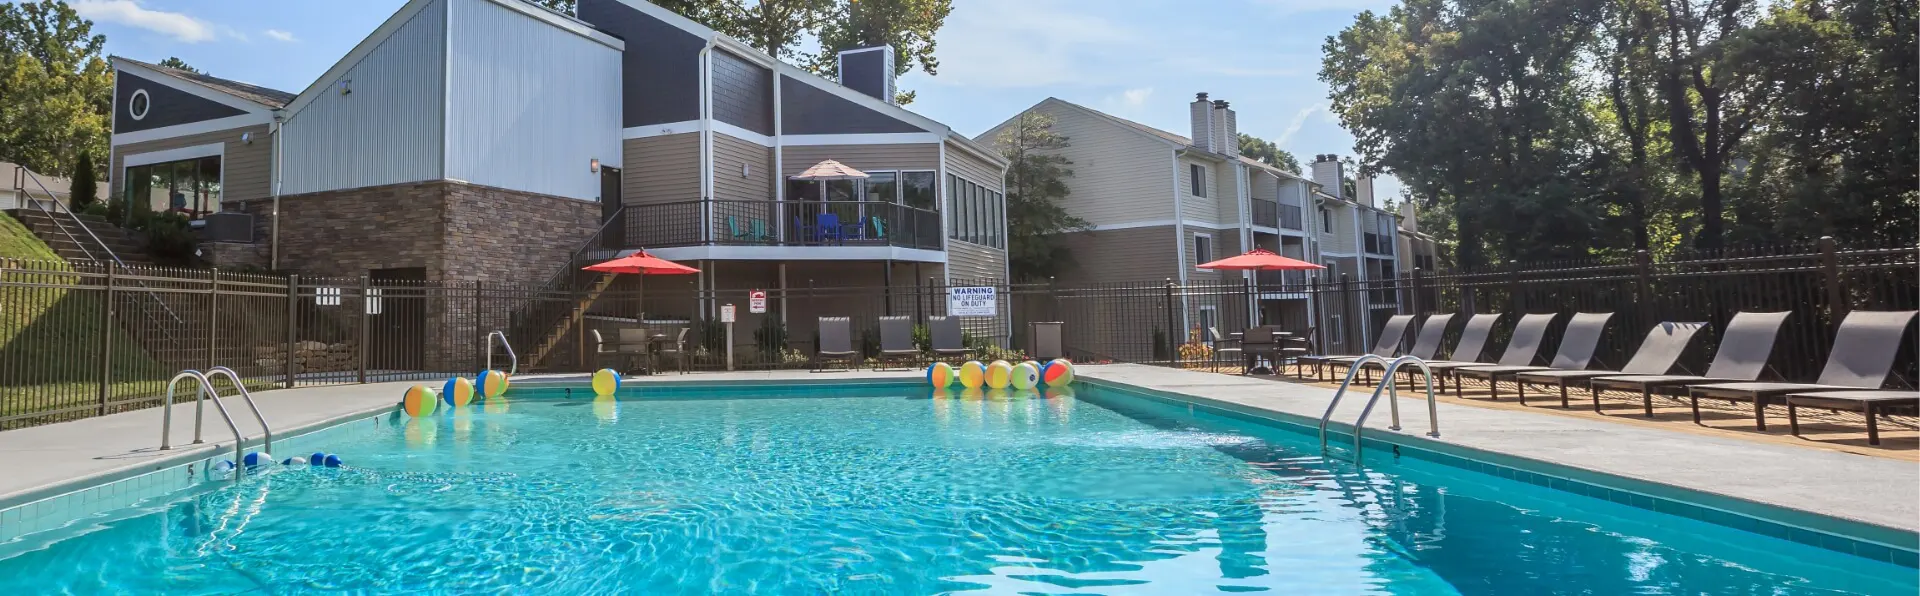 Swimming pool area of an apartment complex